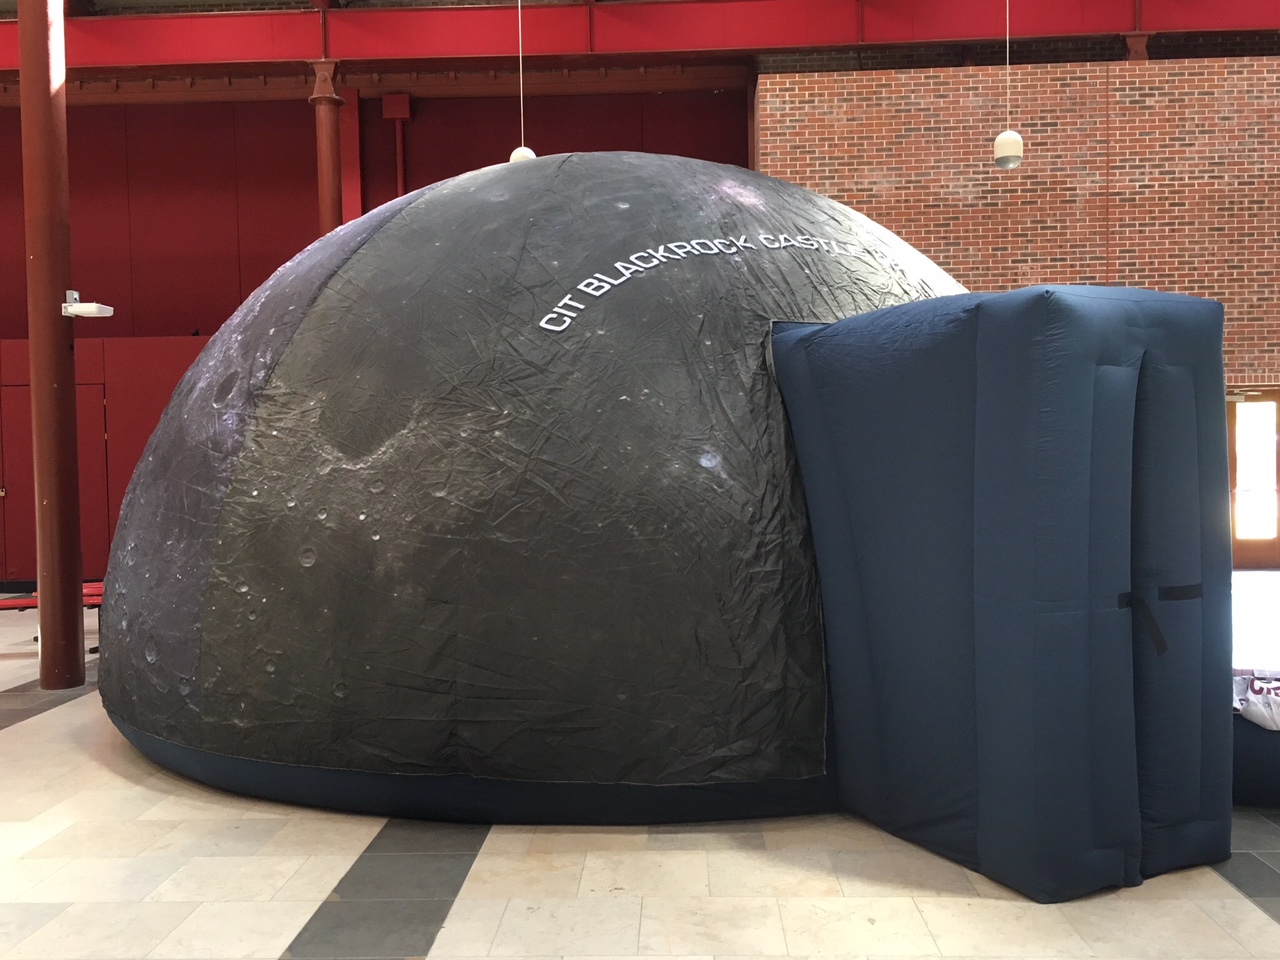 Photo of an inflatable planetarium dome